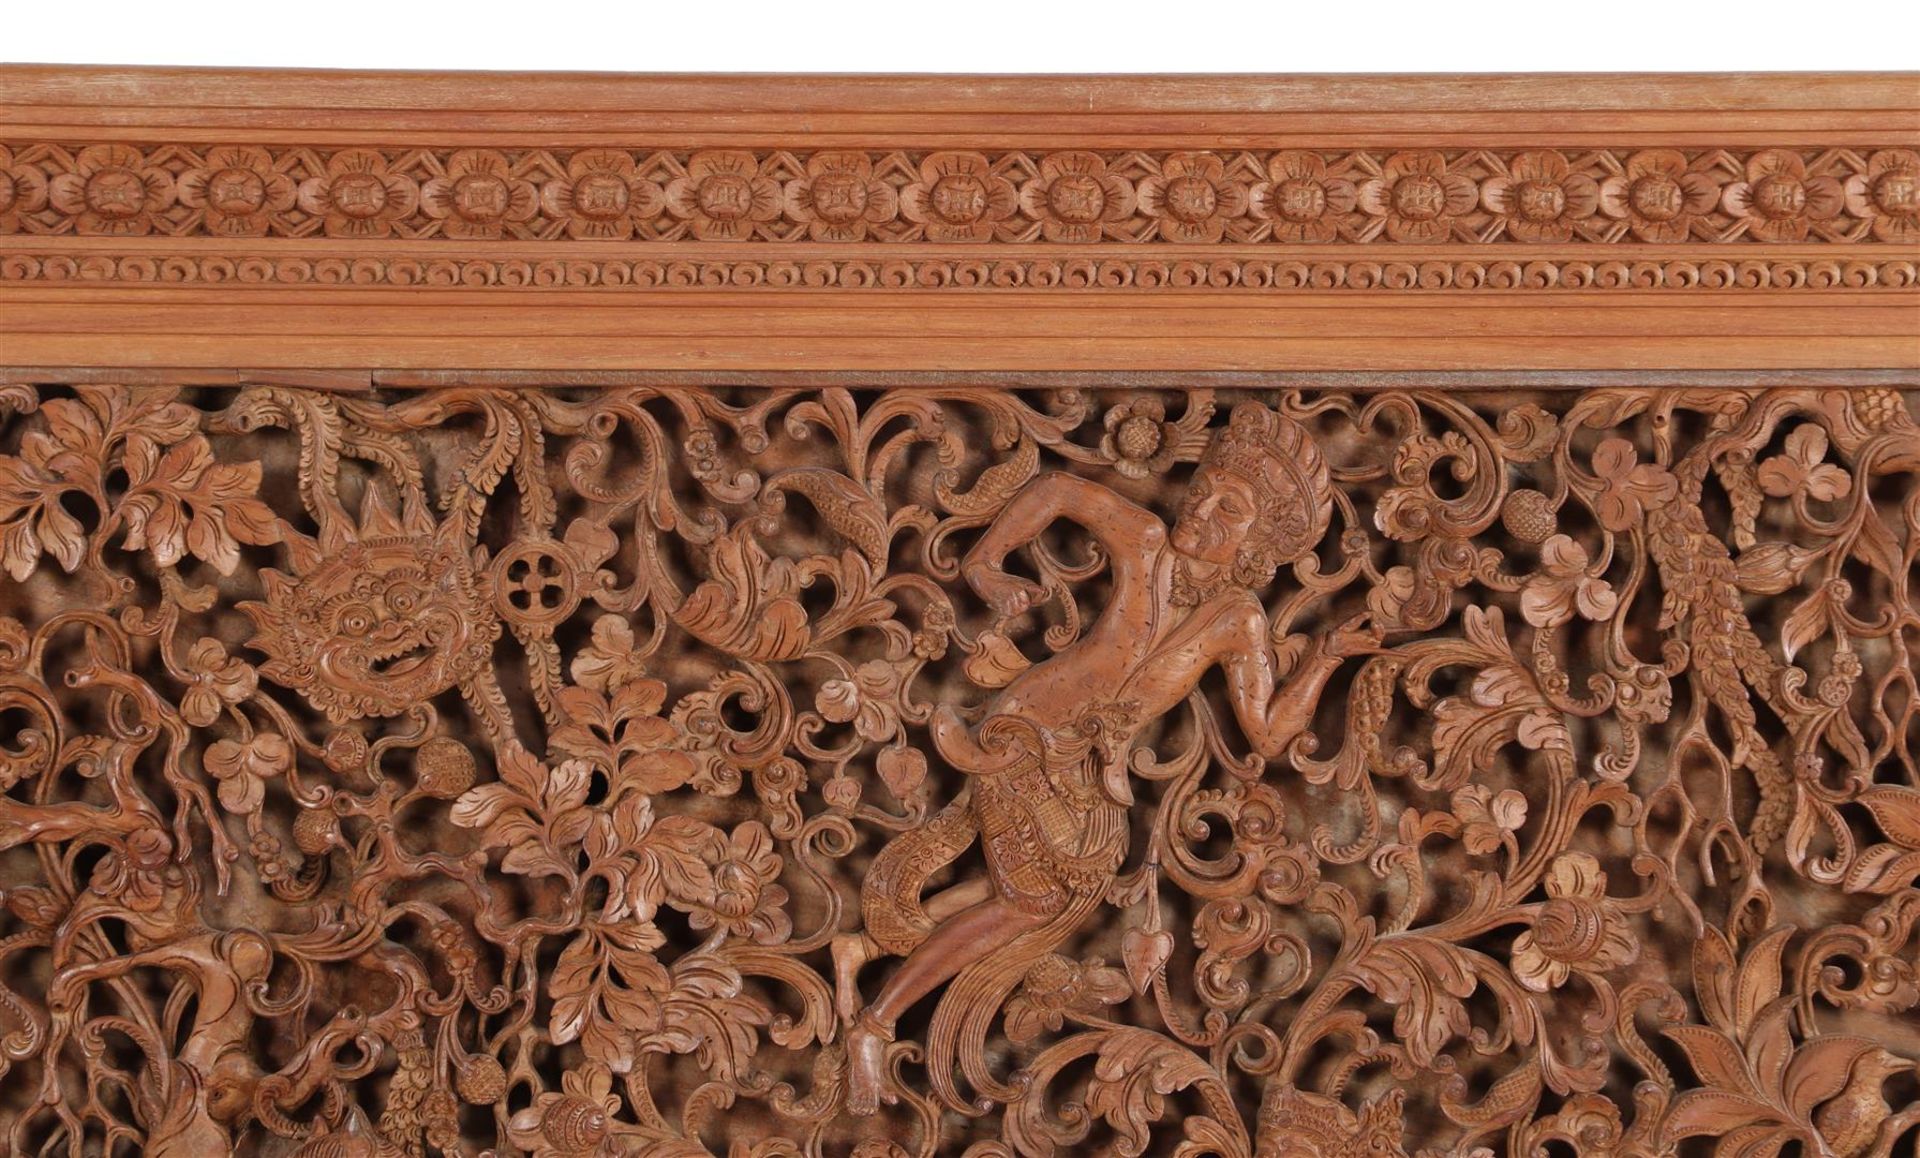 Wooden ornate wall decoration - Image 4 of 6